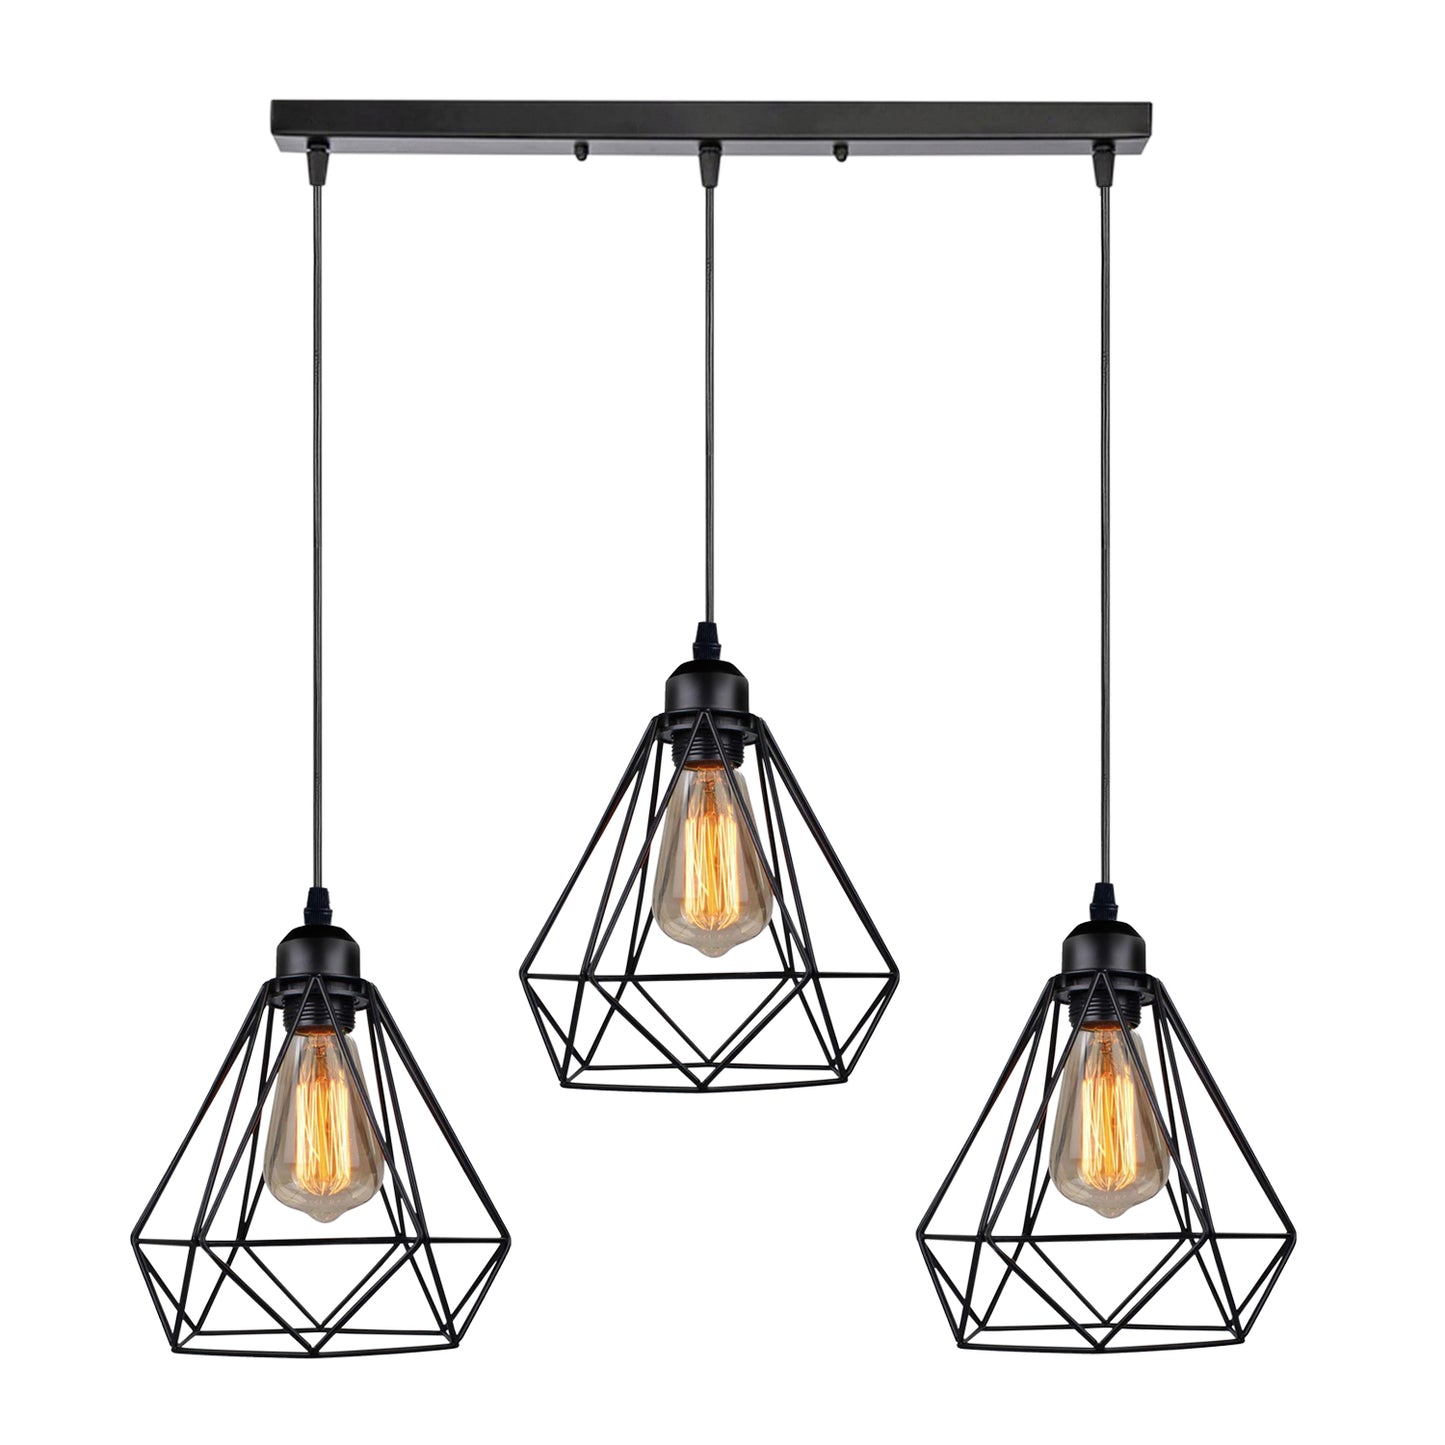 3 way Geometric cage Ceiling Light Fixture for Farm house ~1179